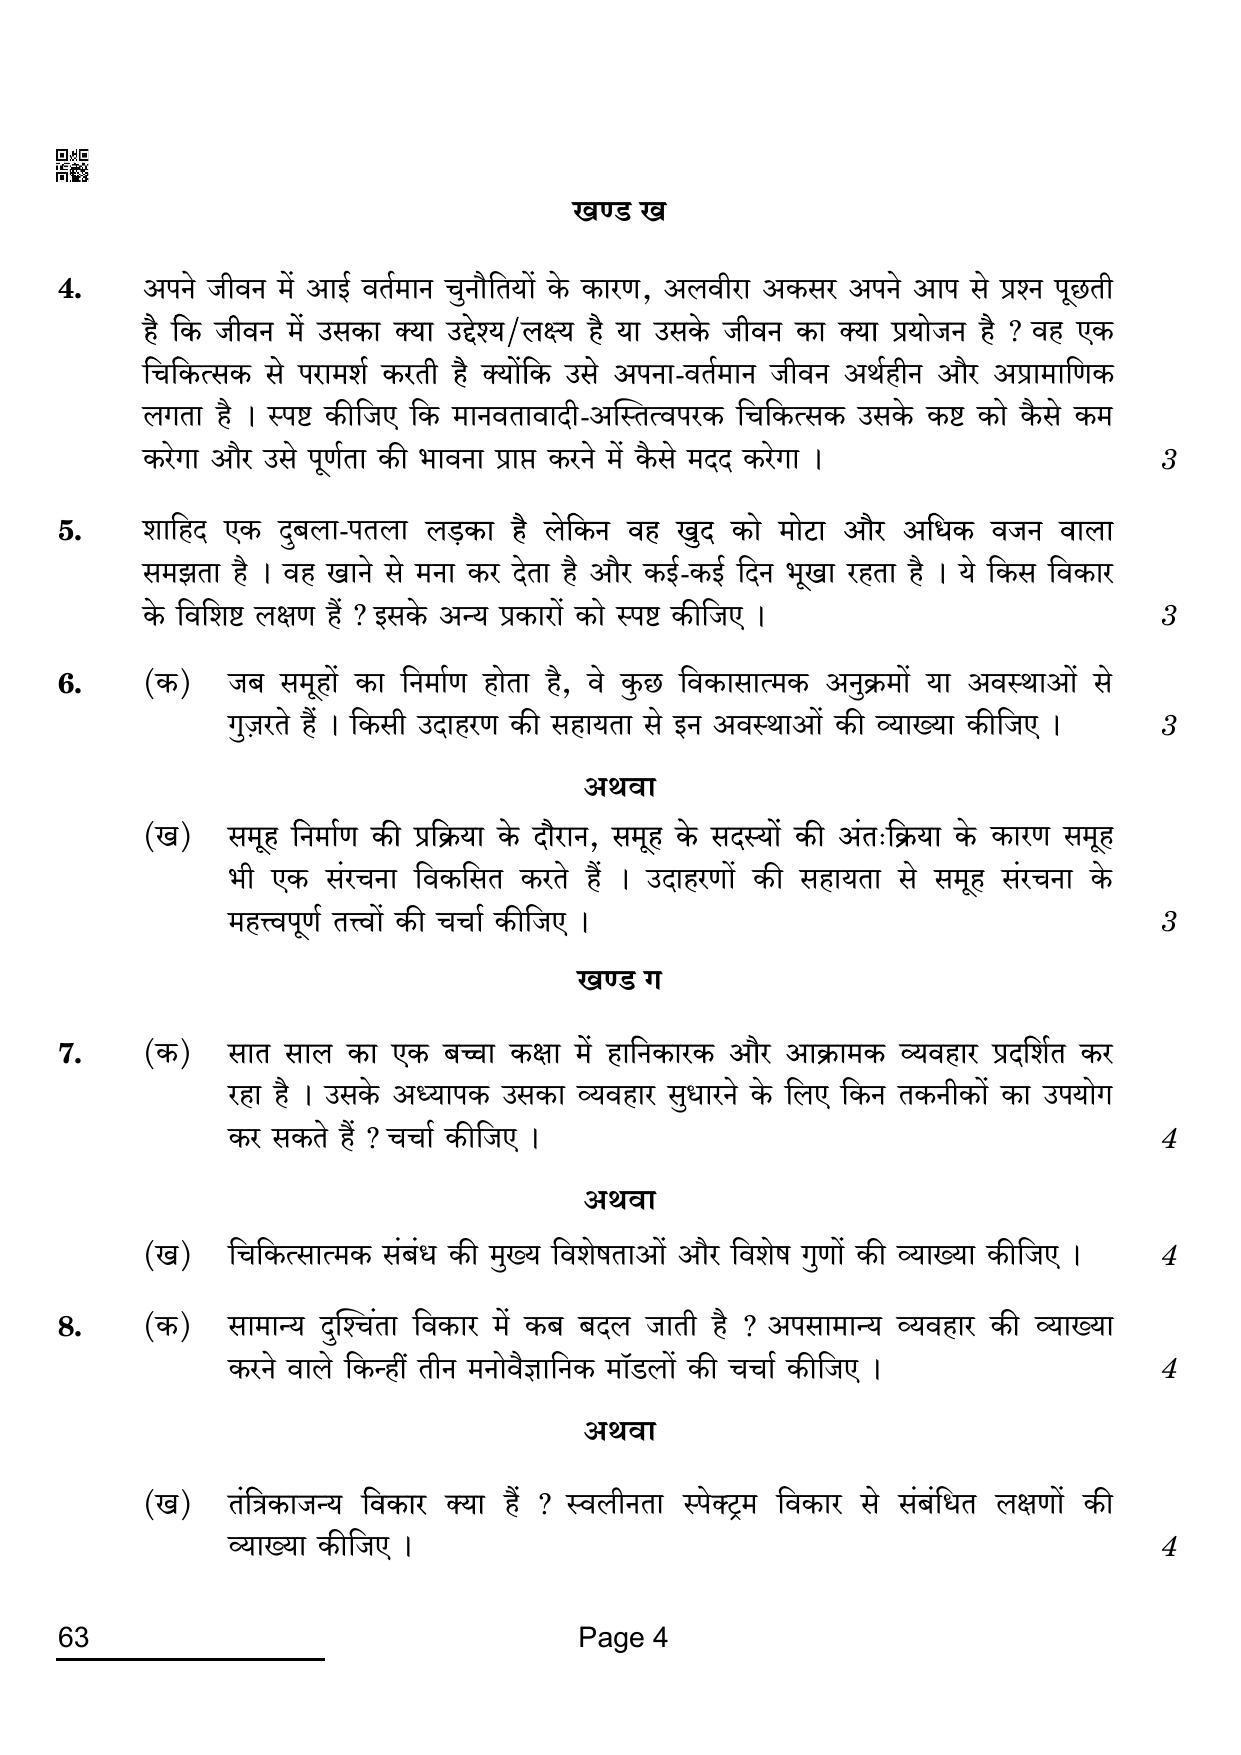 CBSE Class 12 63 Psychology 2022 Compartment Question Paper - Page 4